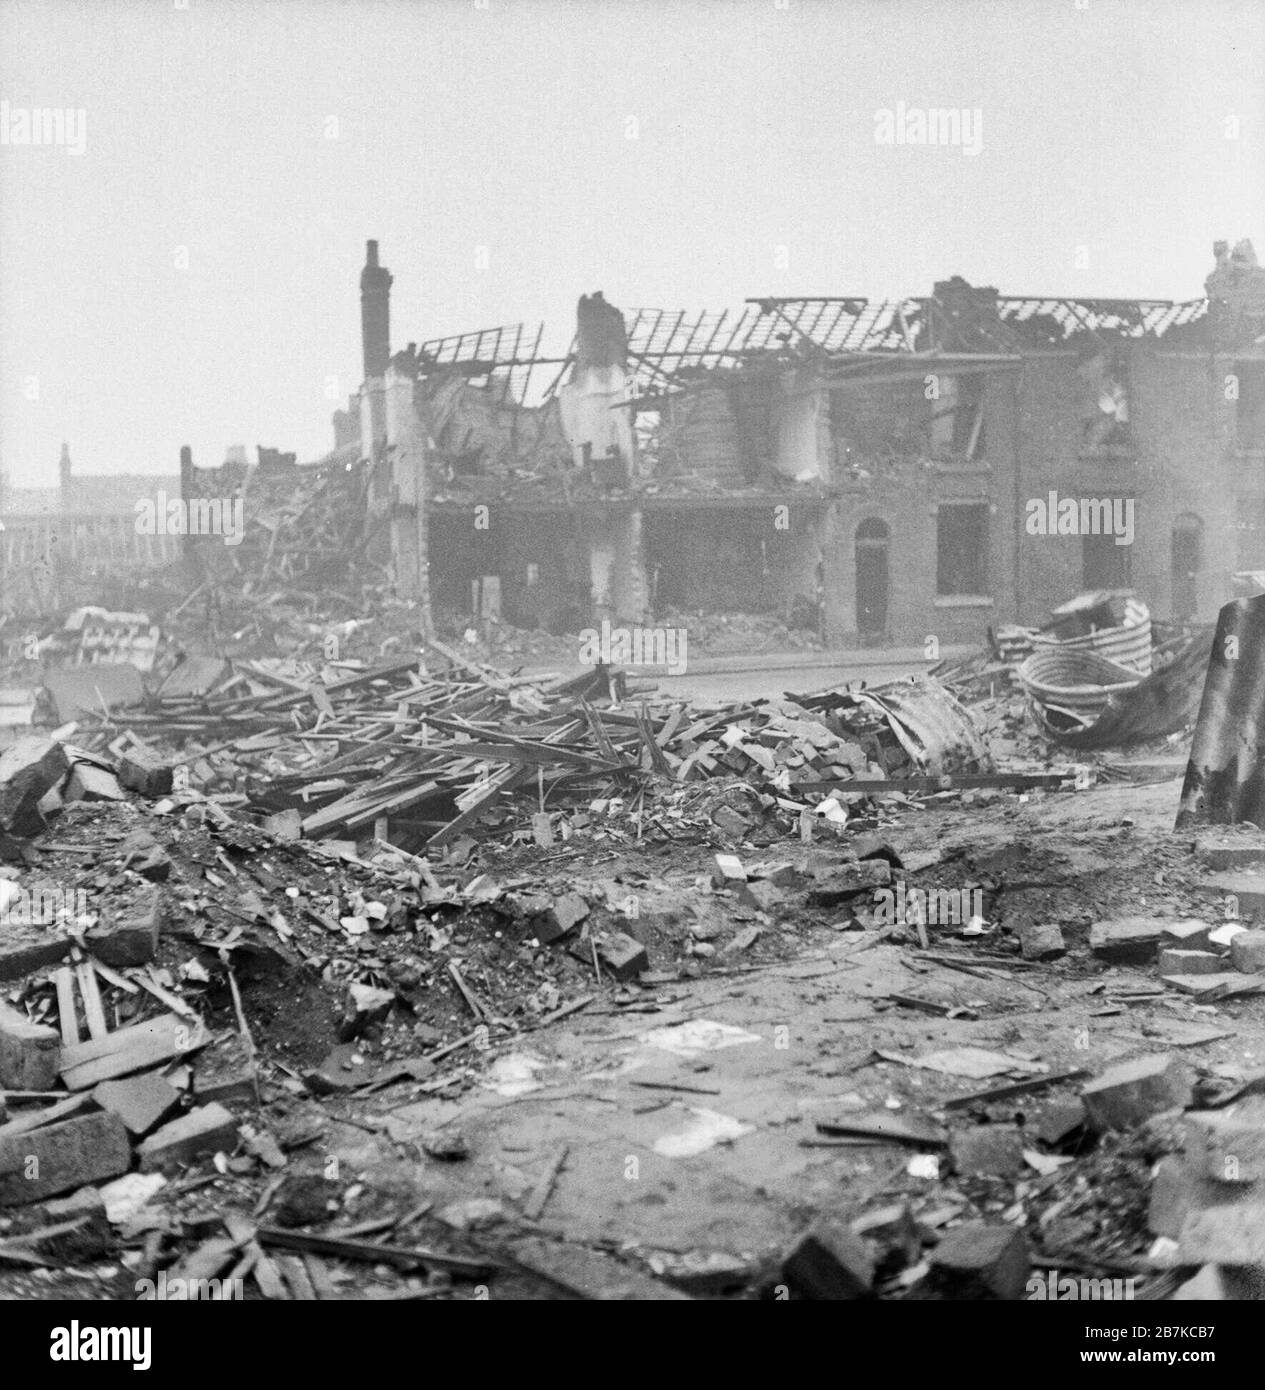 Bomb Damage in Birmingham, England, C 1940 Although some debris has been cleared on this site on James Street, Aston Newtown, Birmingham, a large pile of timbers and some brick rubble can be clearly seen. Also visible to the right of the photograph are the twisted remains of several Anderson shelters. In the background, two of the terraced houses that are still standing have had the front wall stripped away by the blast, revealing the interior walls and floors. Stock Photo